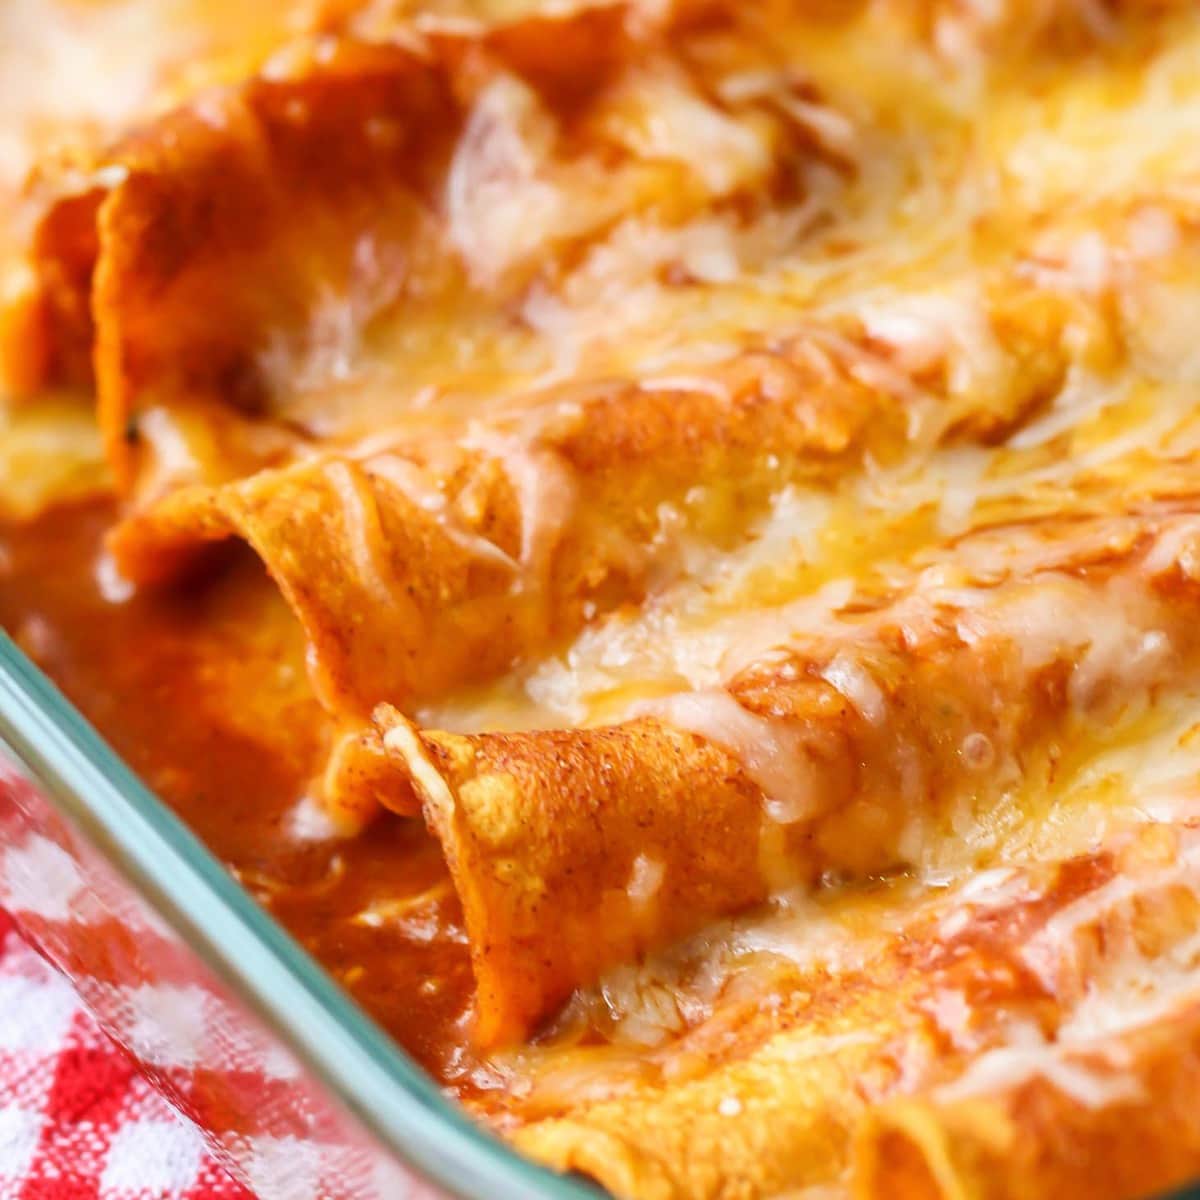 Mexican Christmas food - close up of a baking dish filled with cheese enchiladas.